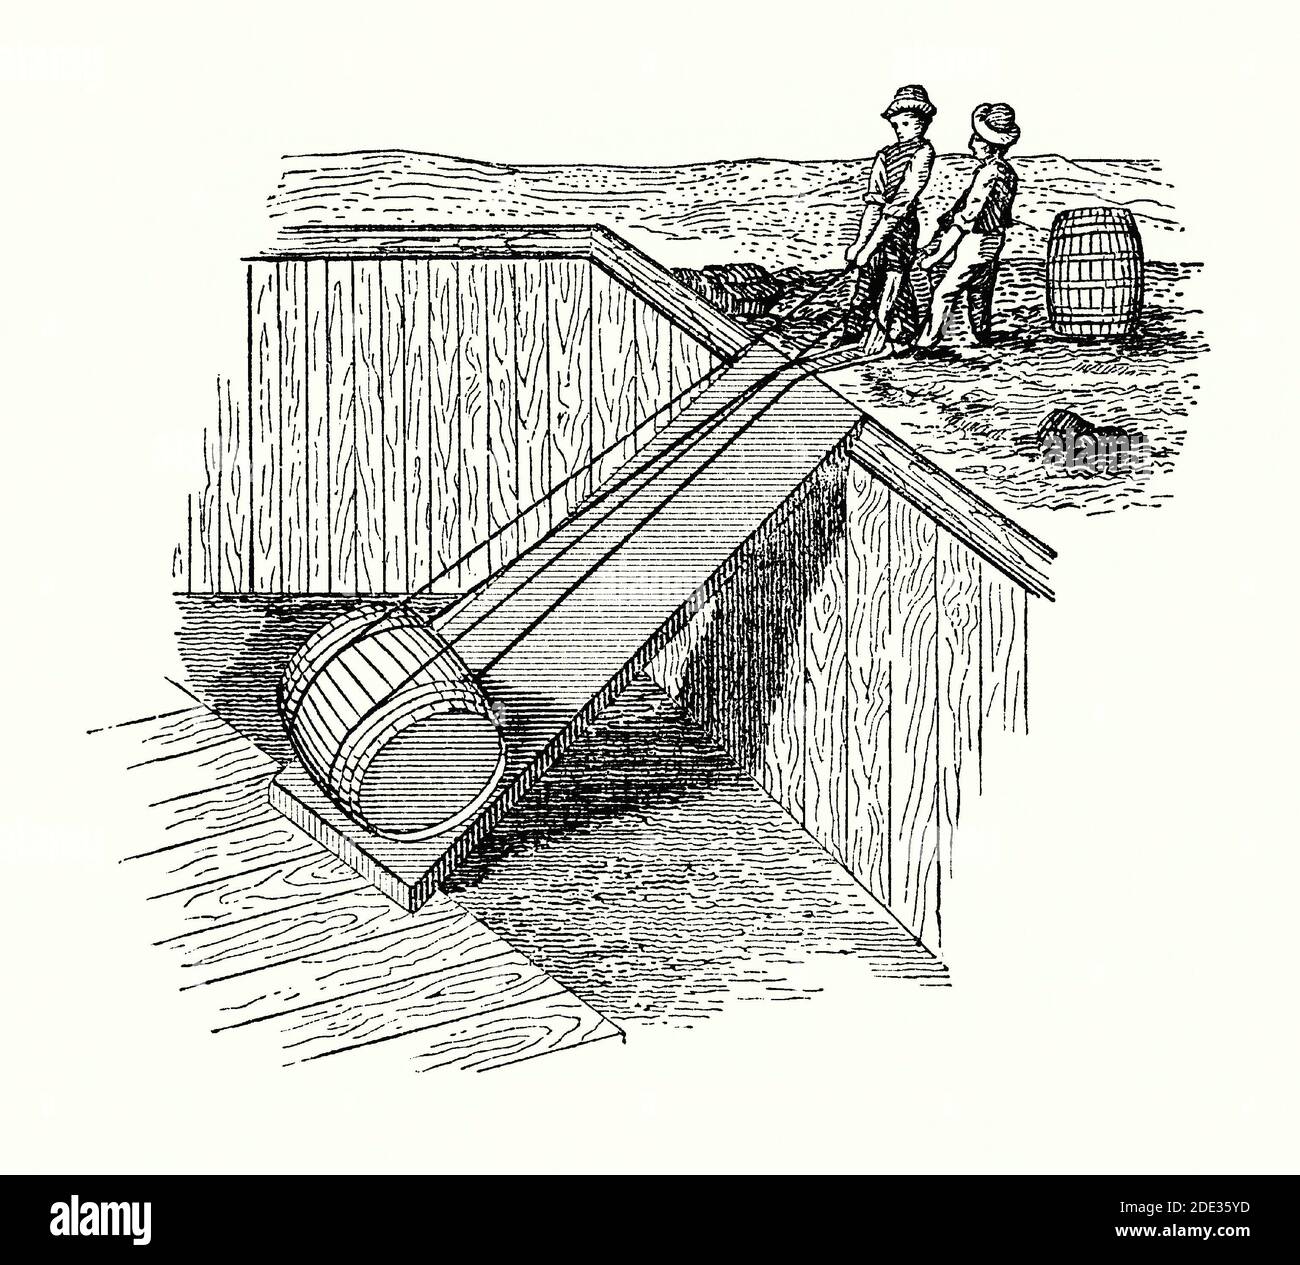 An old engraving of two men using a parbuckle to raise up a barrel on a ramp. It is from a Victorian mechanical engineering book of the 1880s. A parbuckle is a technique using a double-sling length of rope for hoisting or lowering a cylindrical, heavy object, such as this cask. The middle of a long rope is fastened to a post, and both parts are looped around the object. By hauling on the ropes, the heavy object is raised up a slope or ramp – or lowered down when the rope is paid out. This method was very useful in delivering barrels of beer that needed to be lowered down into pub cellars. Stock Photo